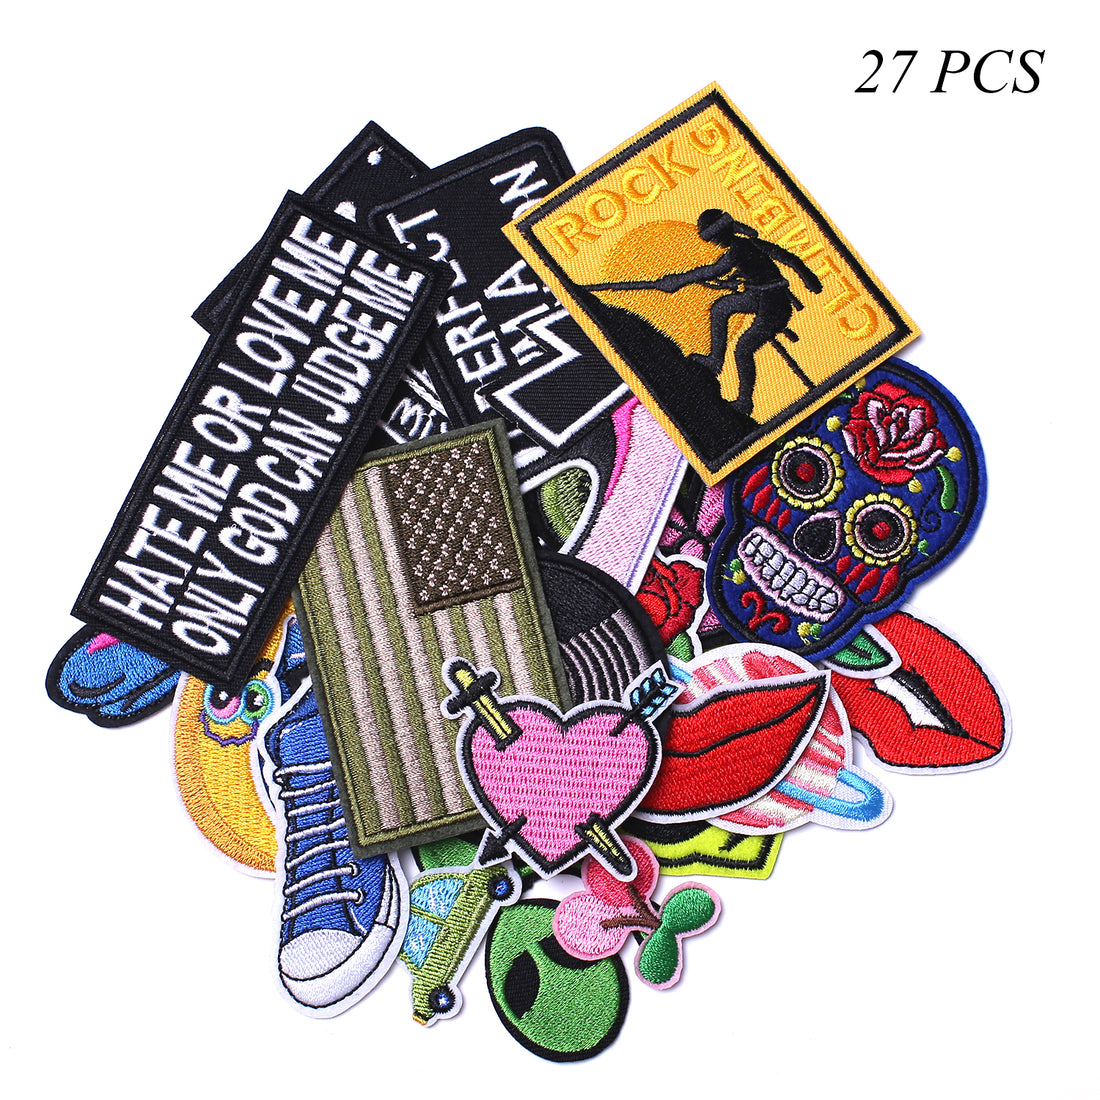 Cool Embroidered Iron on Patches, Cute Sewing Applique for Clothes Dress, Music Theme 27PCS